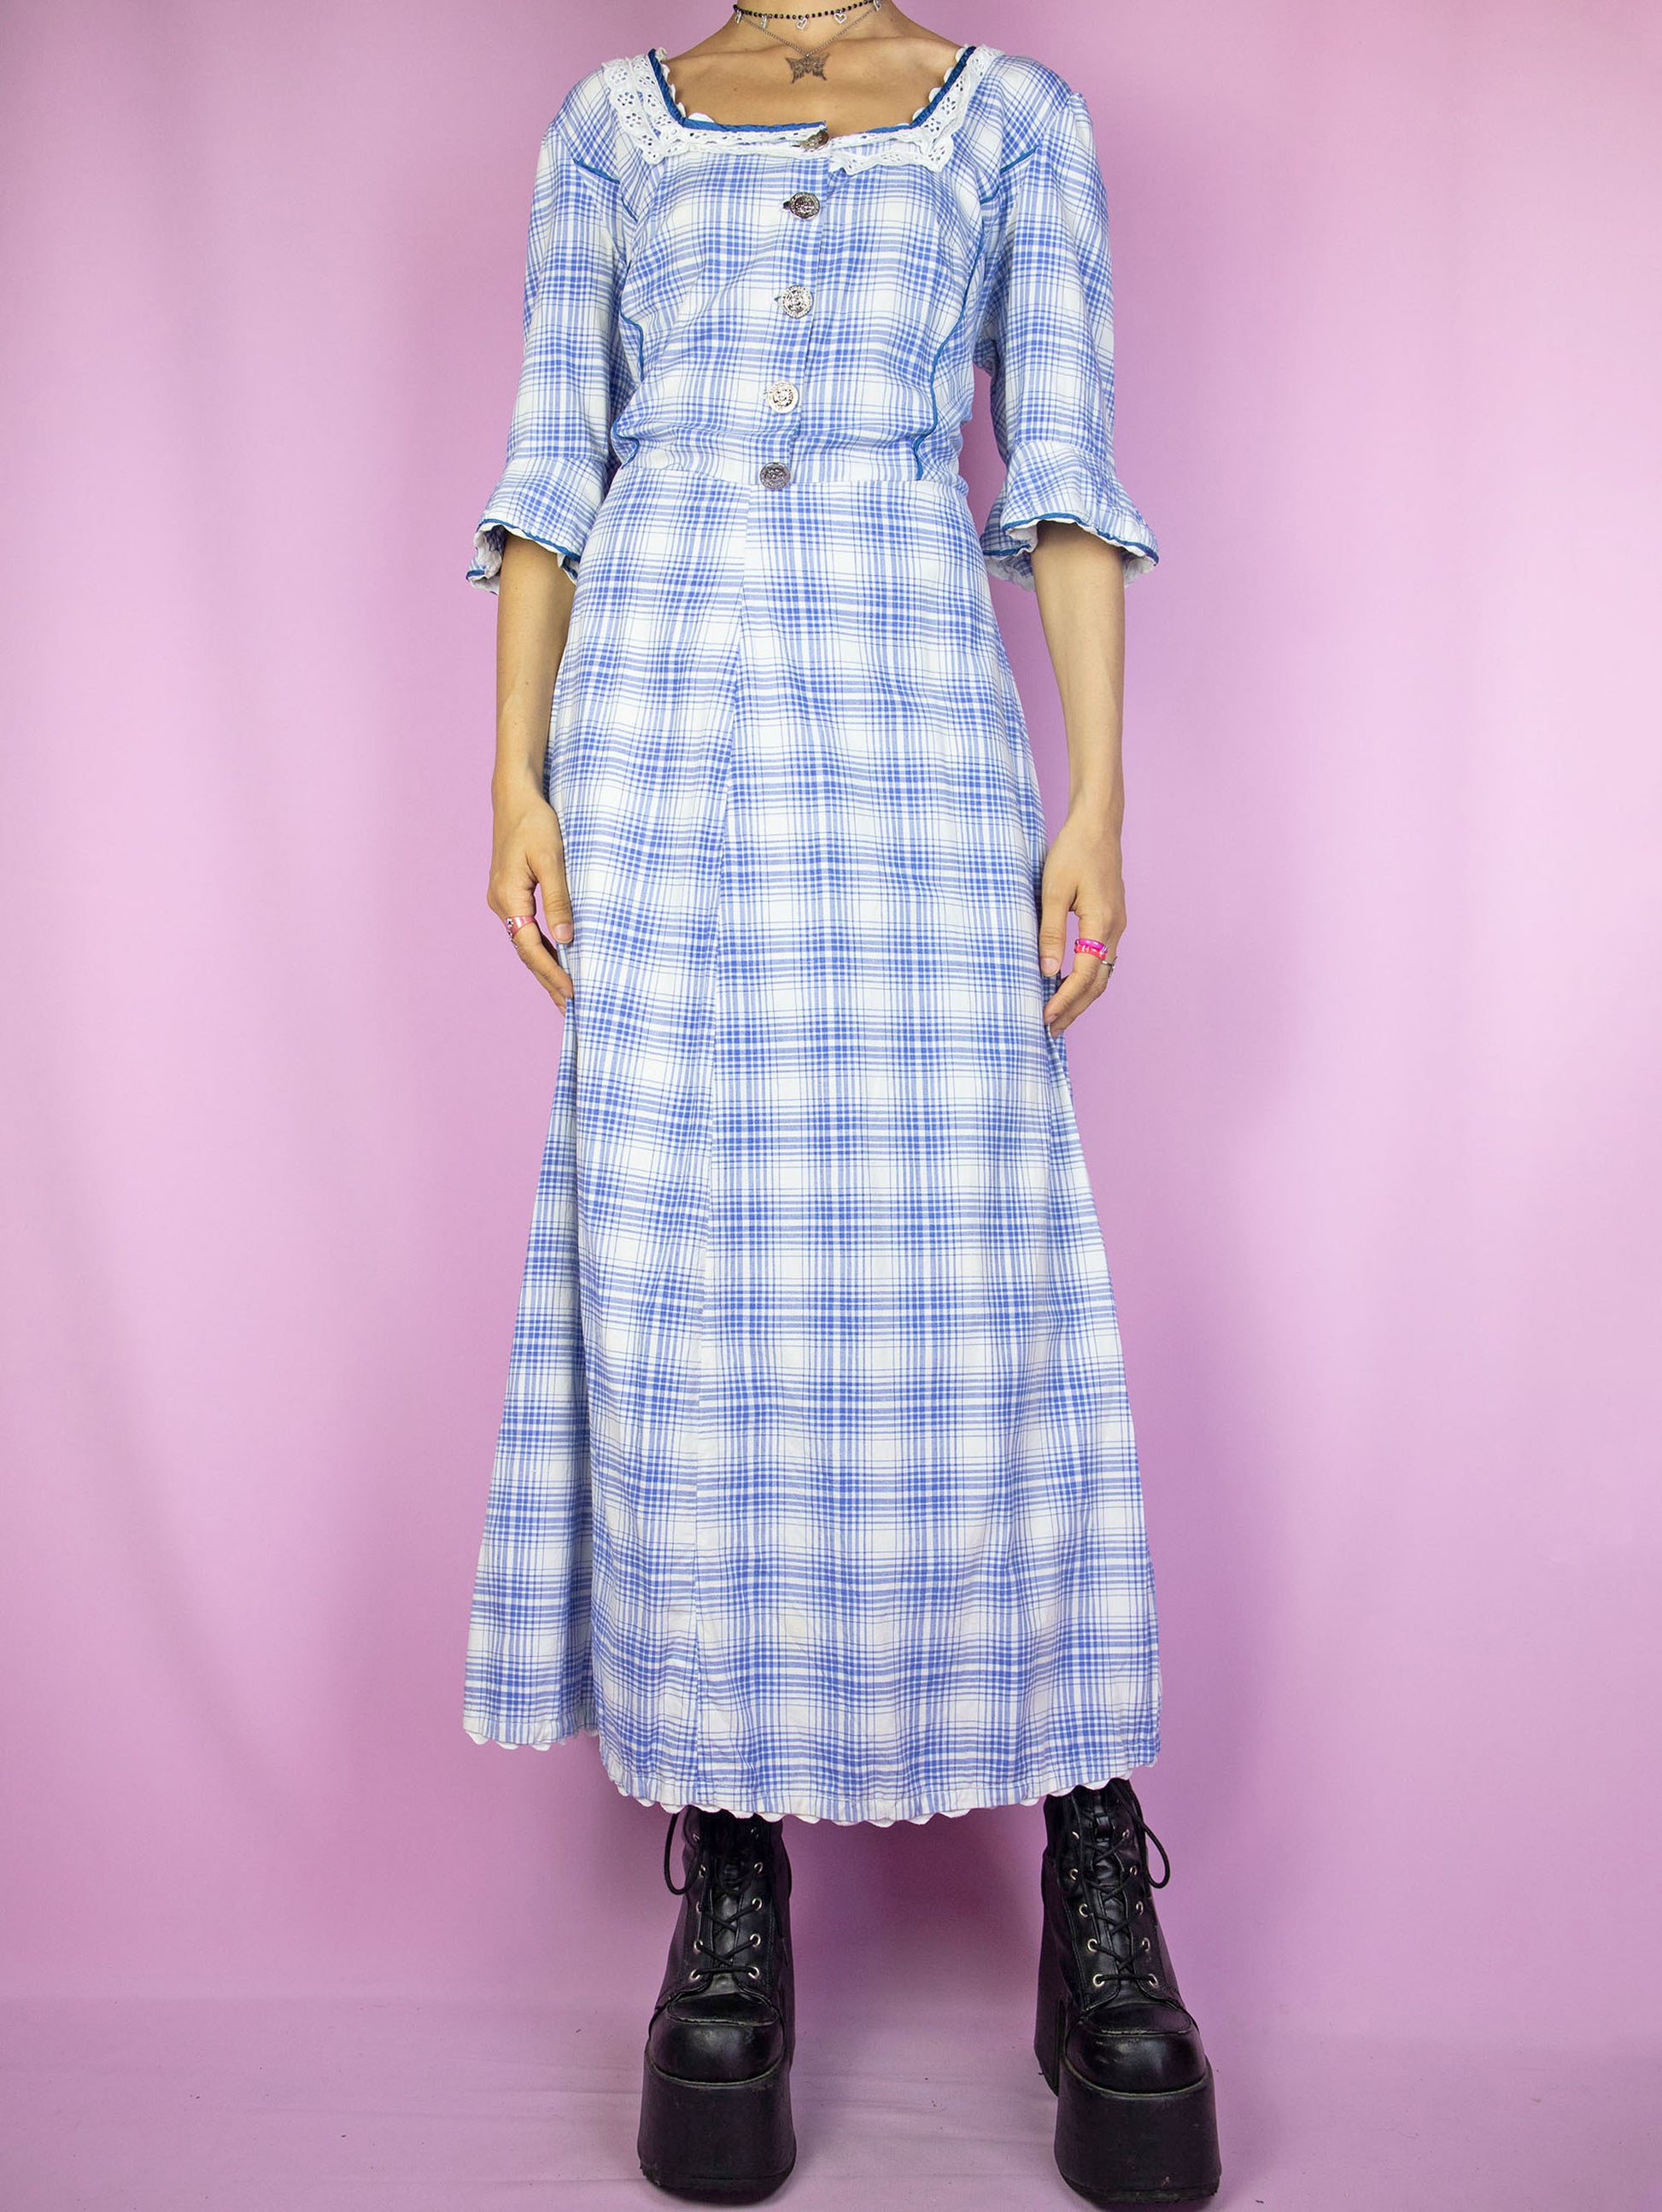 The Vintage 80s Cottage Plaid Maxi Dress is a blue and white check midi dress with buttons, short bell sleeves and a side zipper closure. Milkmaid prairie inspired 1980s country western gingham dress.